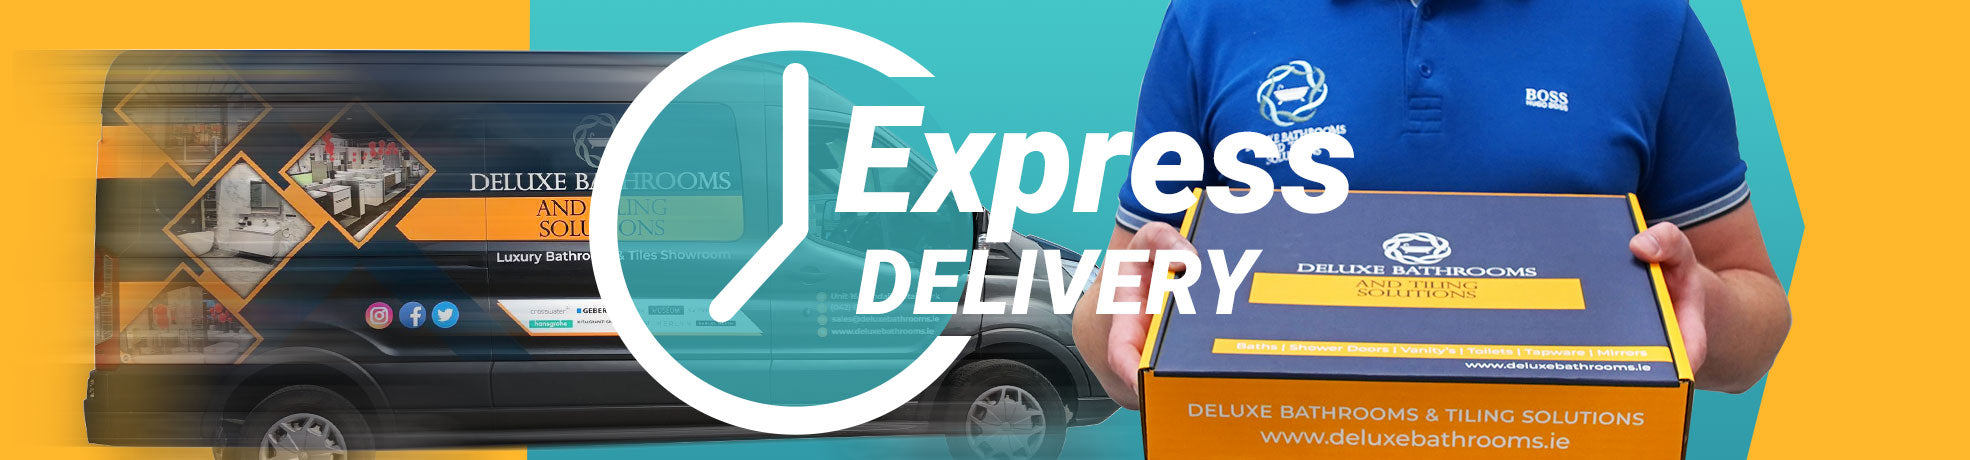 express delivery for bathroom products and tiles